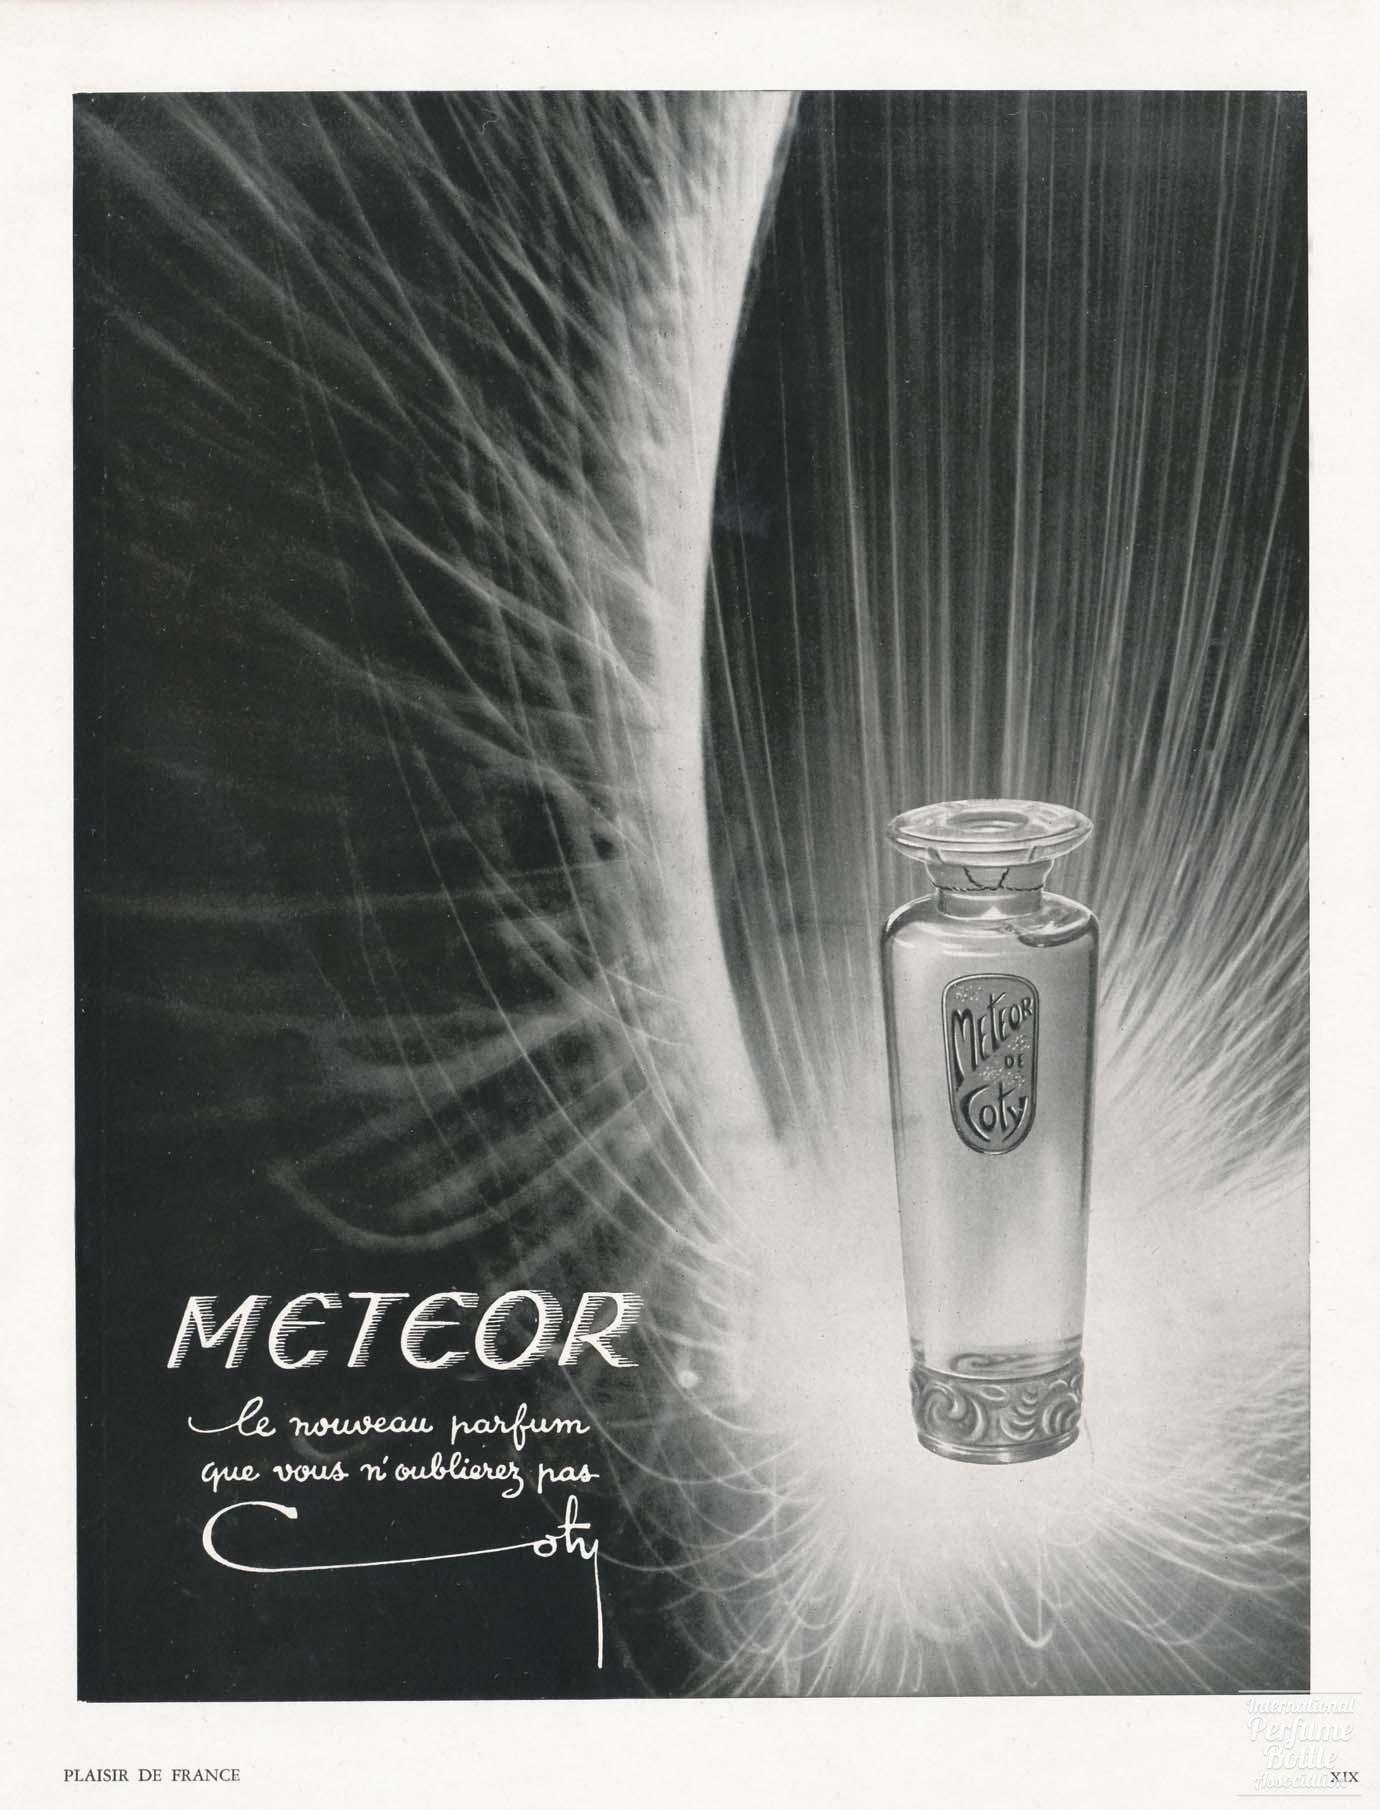 "Meteor" by Coty Advertisement - 1951